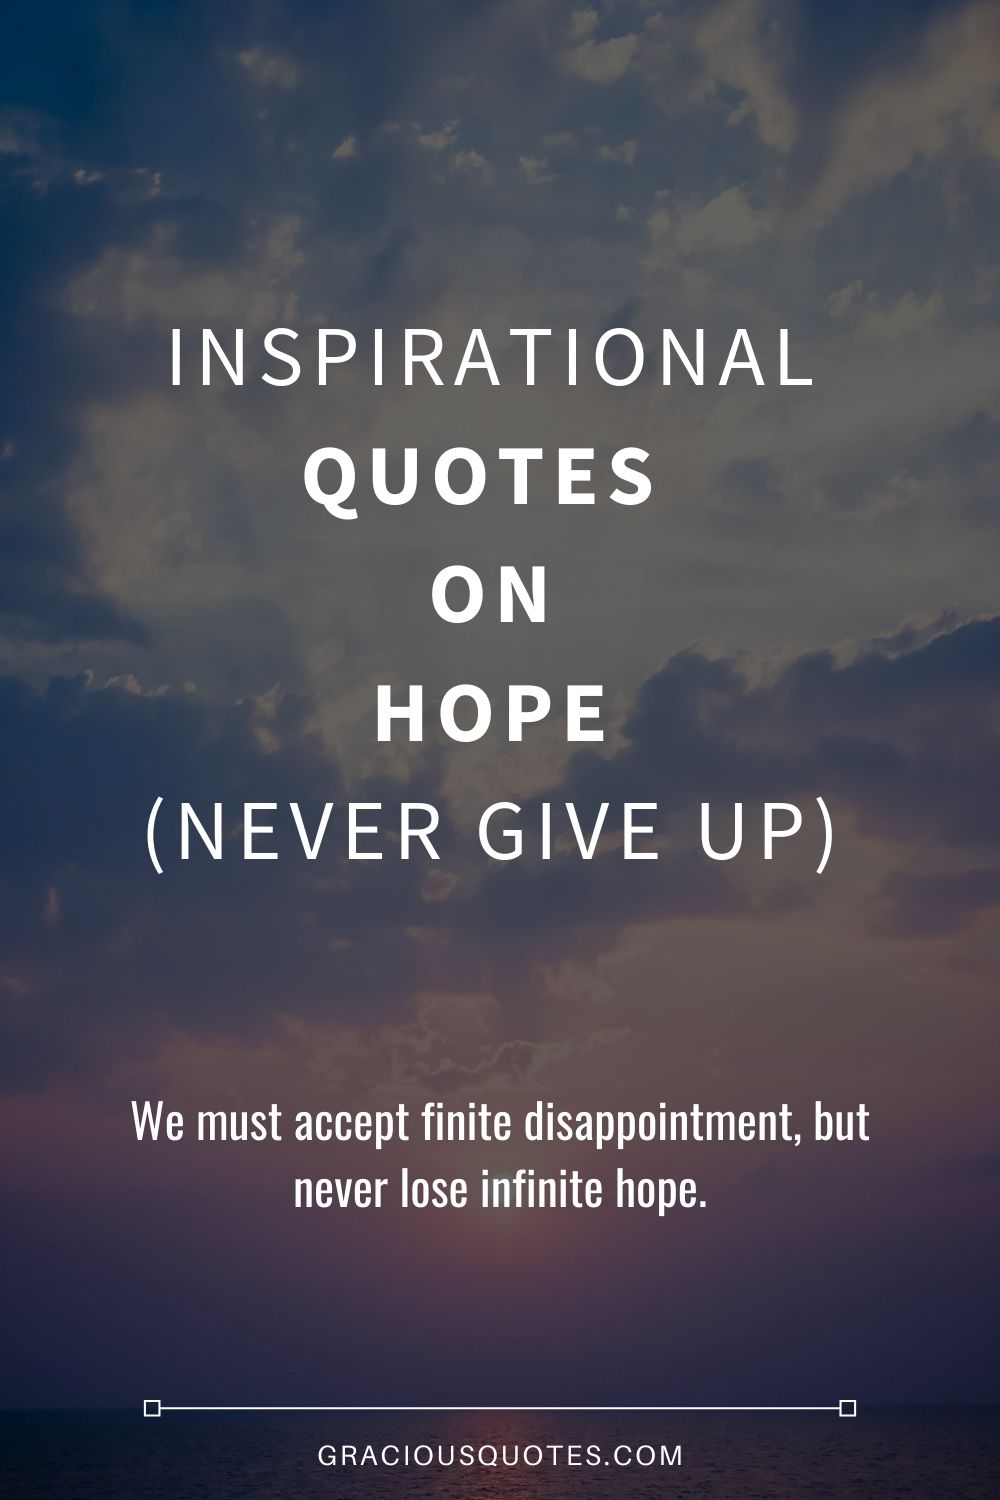 inspirational quotes about not giving up on life